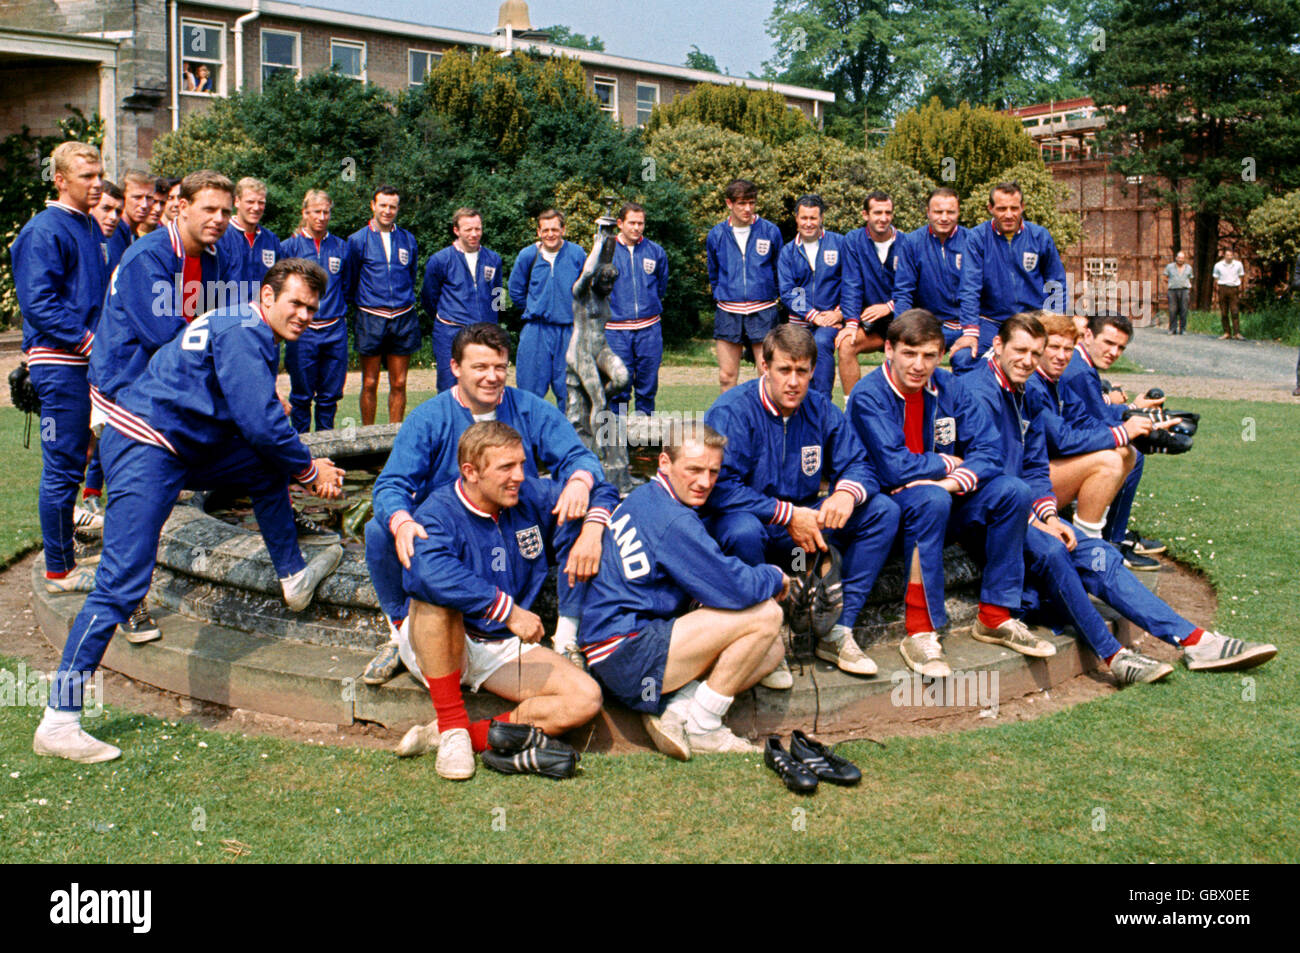 The possible members of England's World Cup squad gather around a fountain at Lilleshall: (standing, l-r) Bobby Moore, Ian Callaghan, Jack Charlton, Peter Bonetti, Gordon Banks, Gordon Milne, Ron Flowers, John Connelly (leaning), Bobby Charlton, Jimmy Armfield, Nobby Stiles, trainer Les Cocker, coach Wilf McGuinness, Norman Hunter, trainer Harold Shepherdson, Gerry Byrne, George Cohen, Ron Springett; (sitting, l-r) Johnny Byrne (back), Peter Thompson, George Eastham, Geoff Hurst, Martin Peters, Keith Newton, Alan Ball, Terry Paine Stock Photo